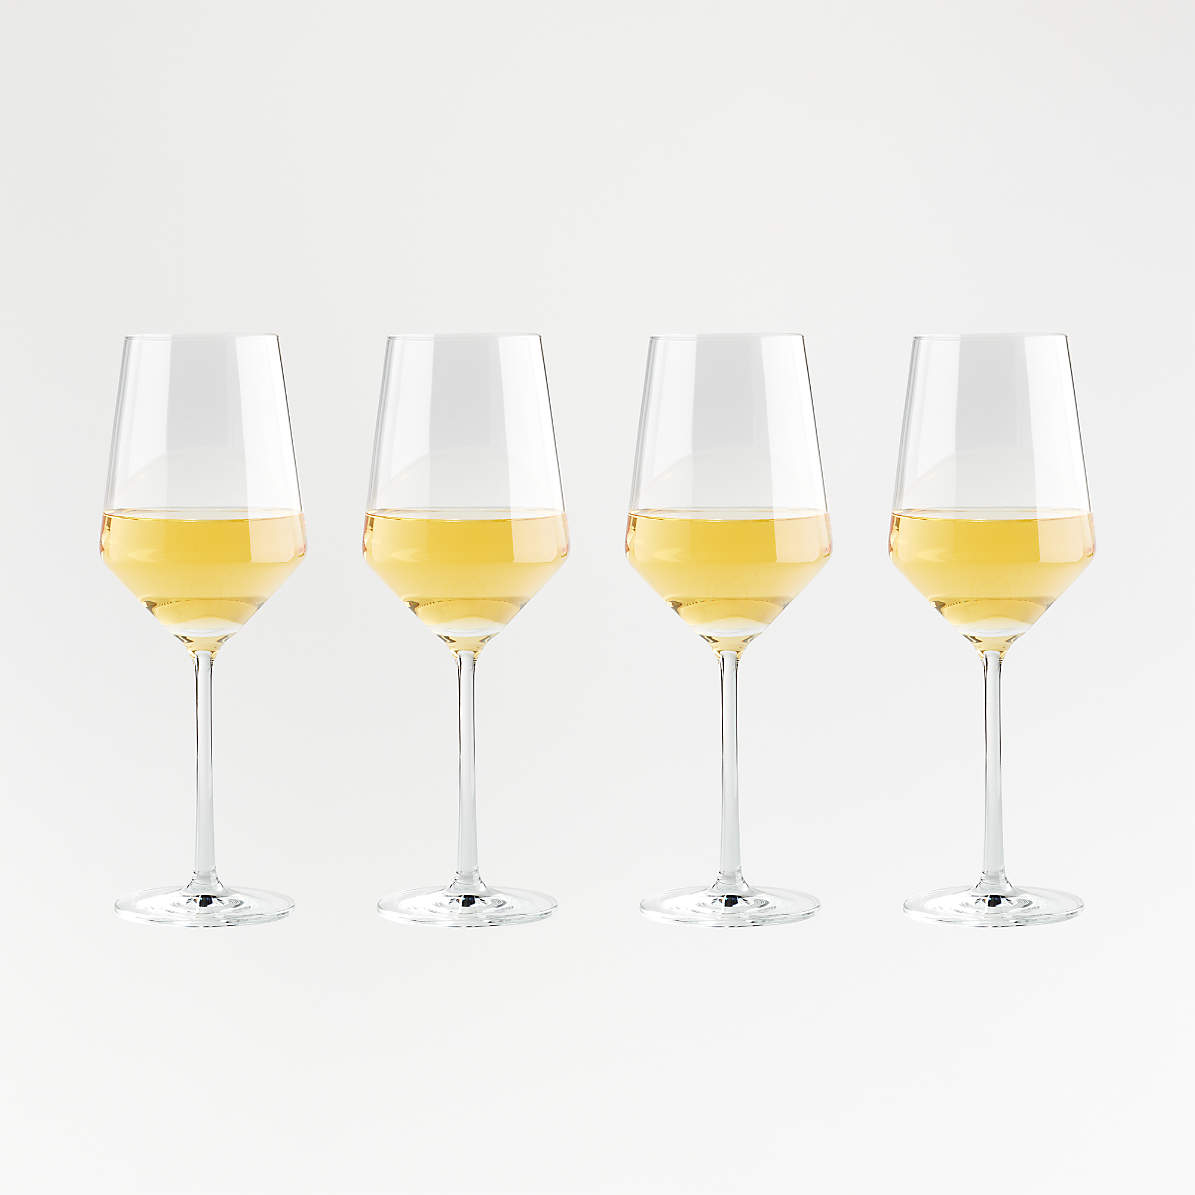 GetUSCart- Exquisite White Wine Glasses [Set of 4] 14 Ounce - Lead